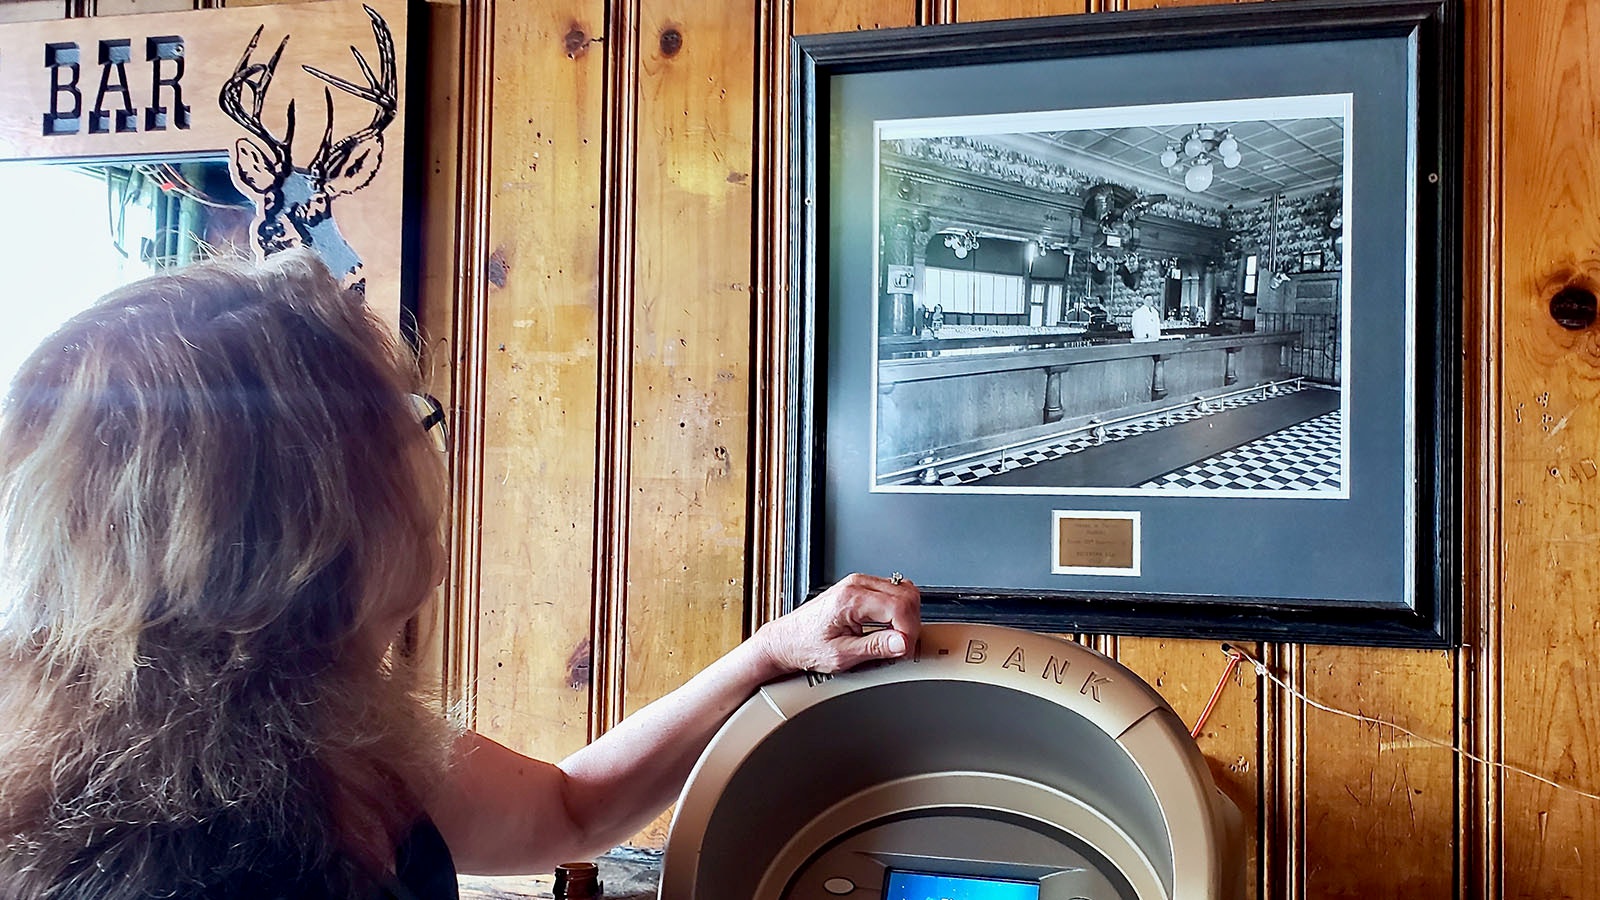 Buckhorn Bar owner Mary Hopkins looks at a photo of the Buckhorn in the 1940s.